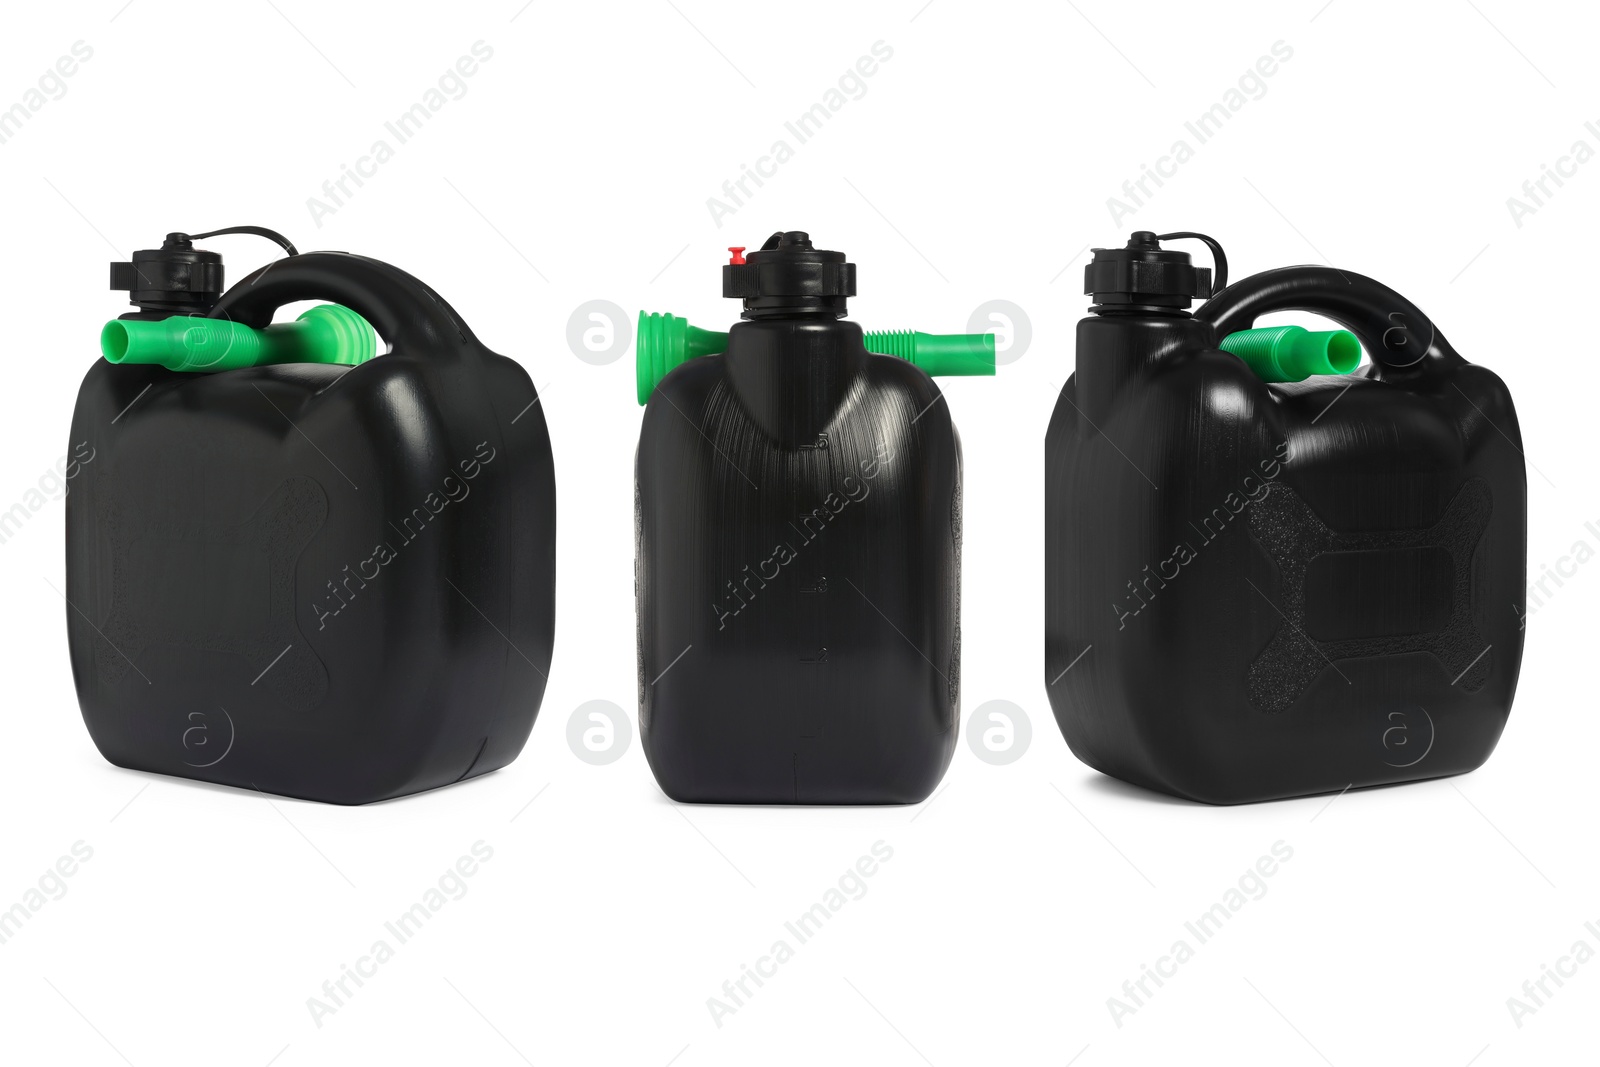 Image of Black plastic canister on white background, different sides